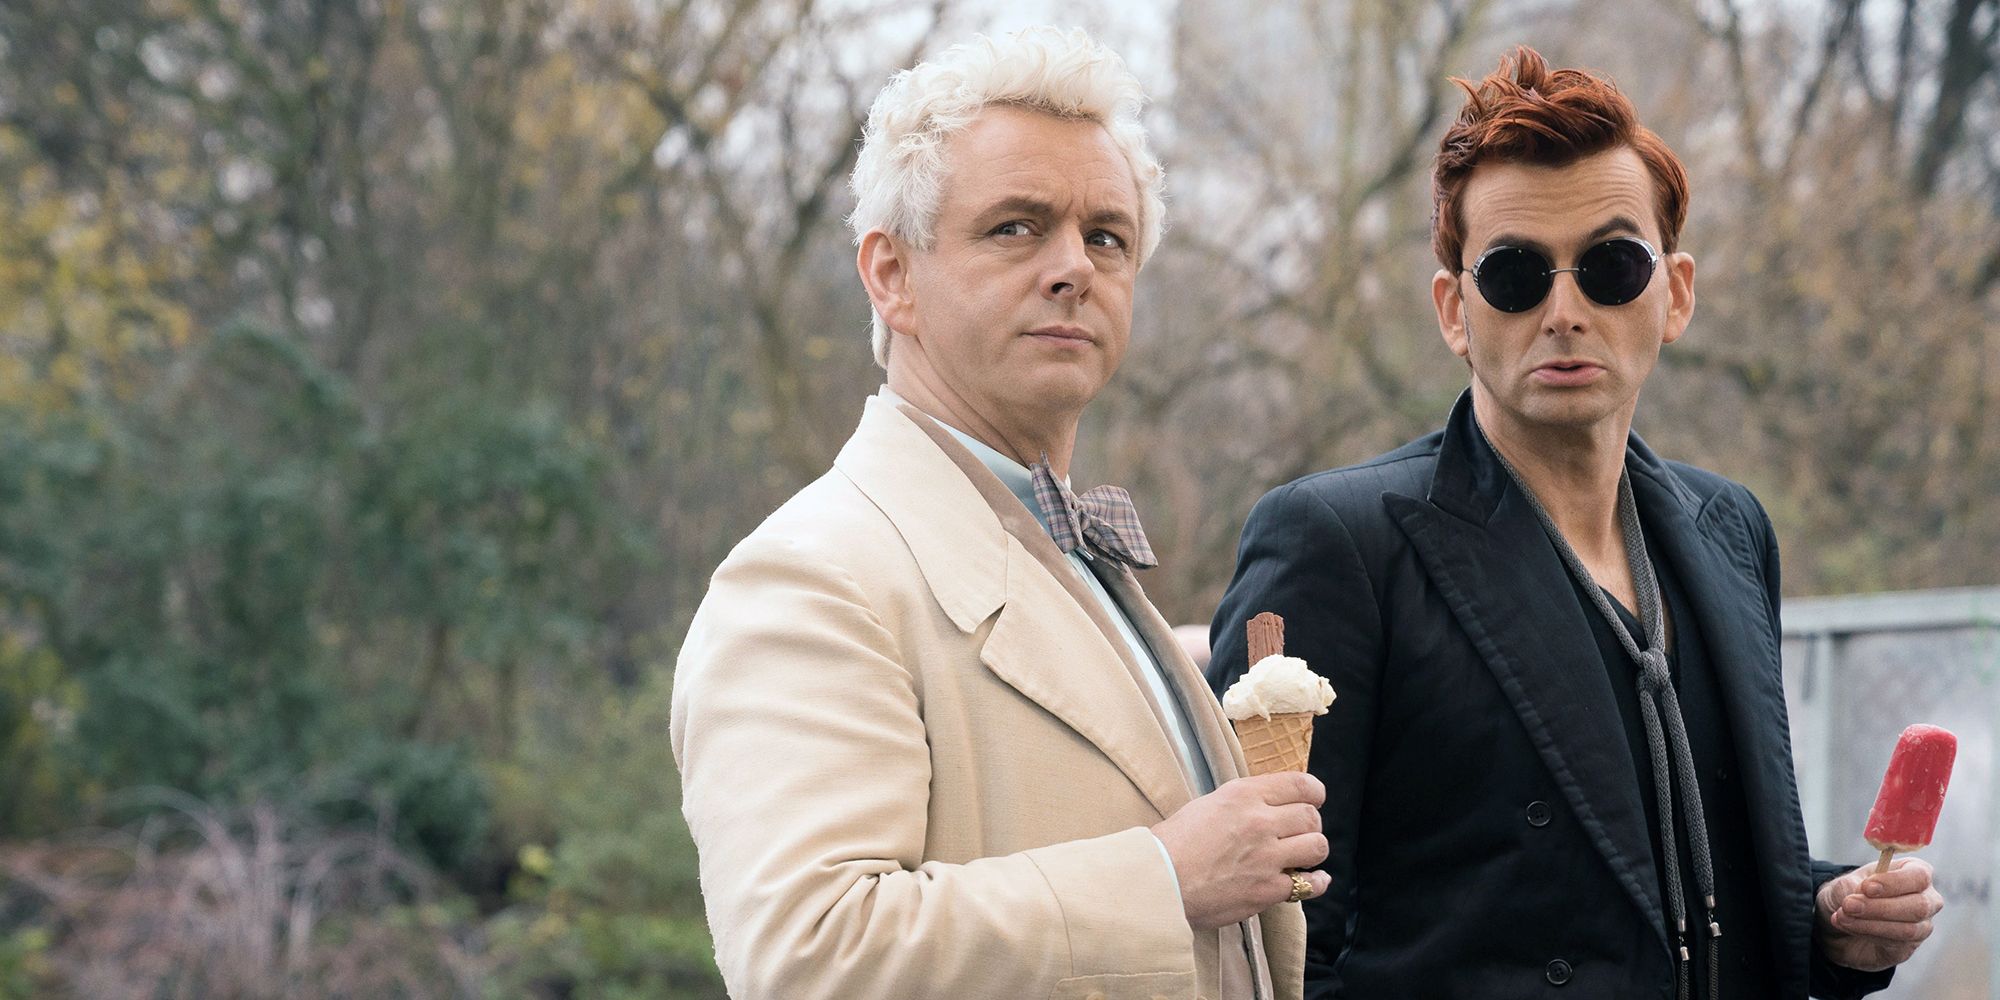 Gaiman ensured that 'Good Omens' was an extremely faithful adaption in honor of his late co-writer, Terry Pratchett